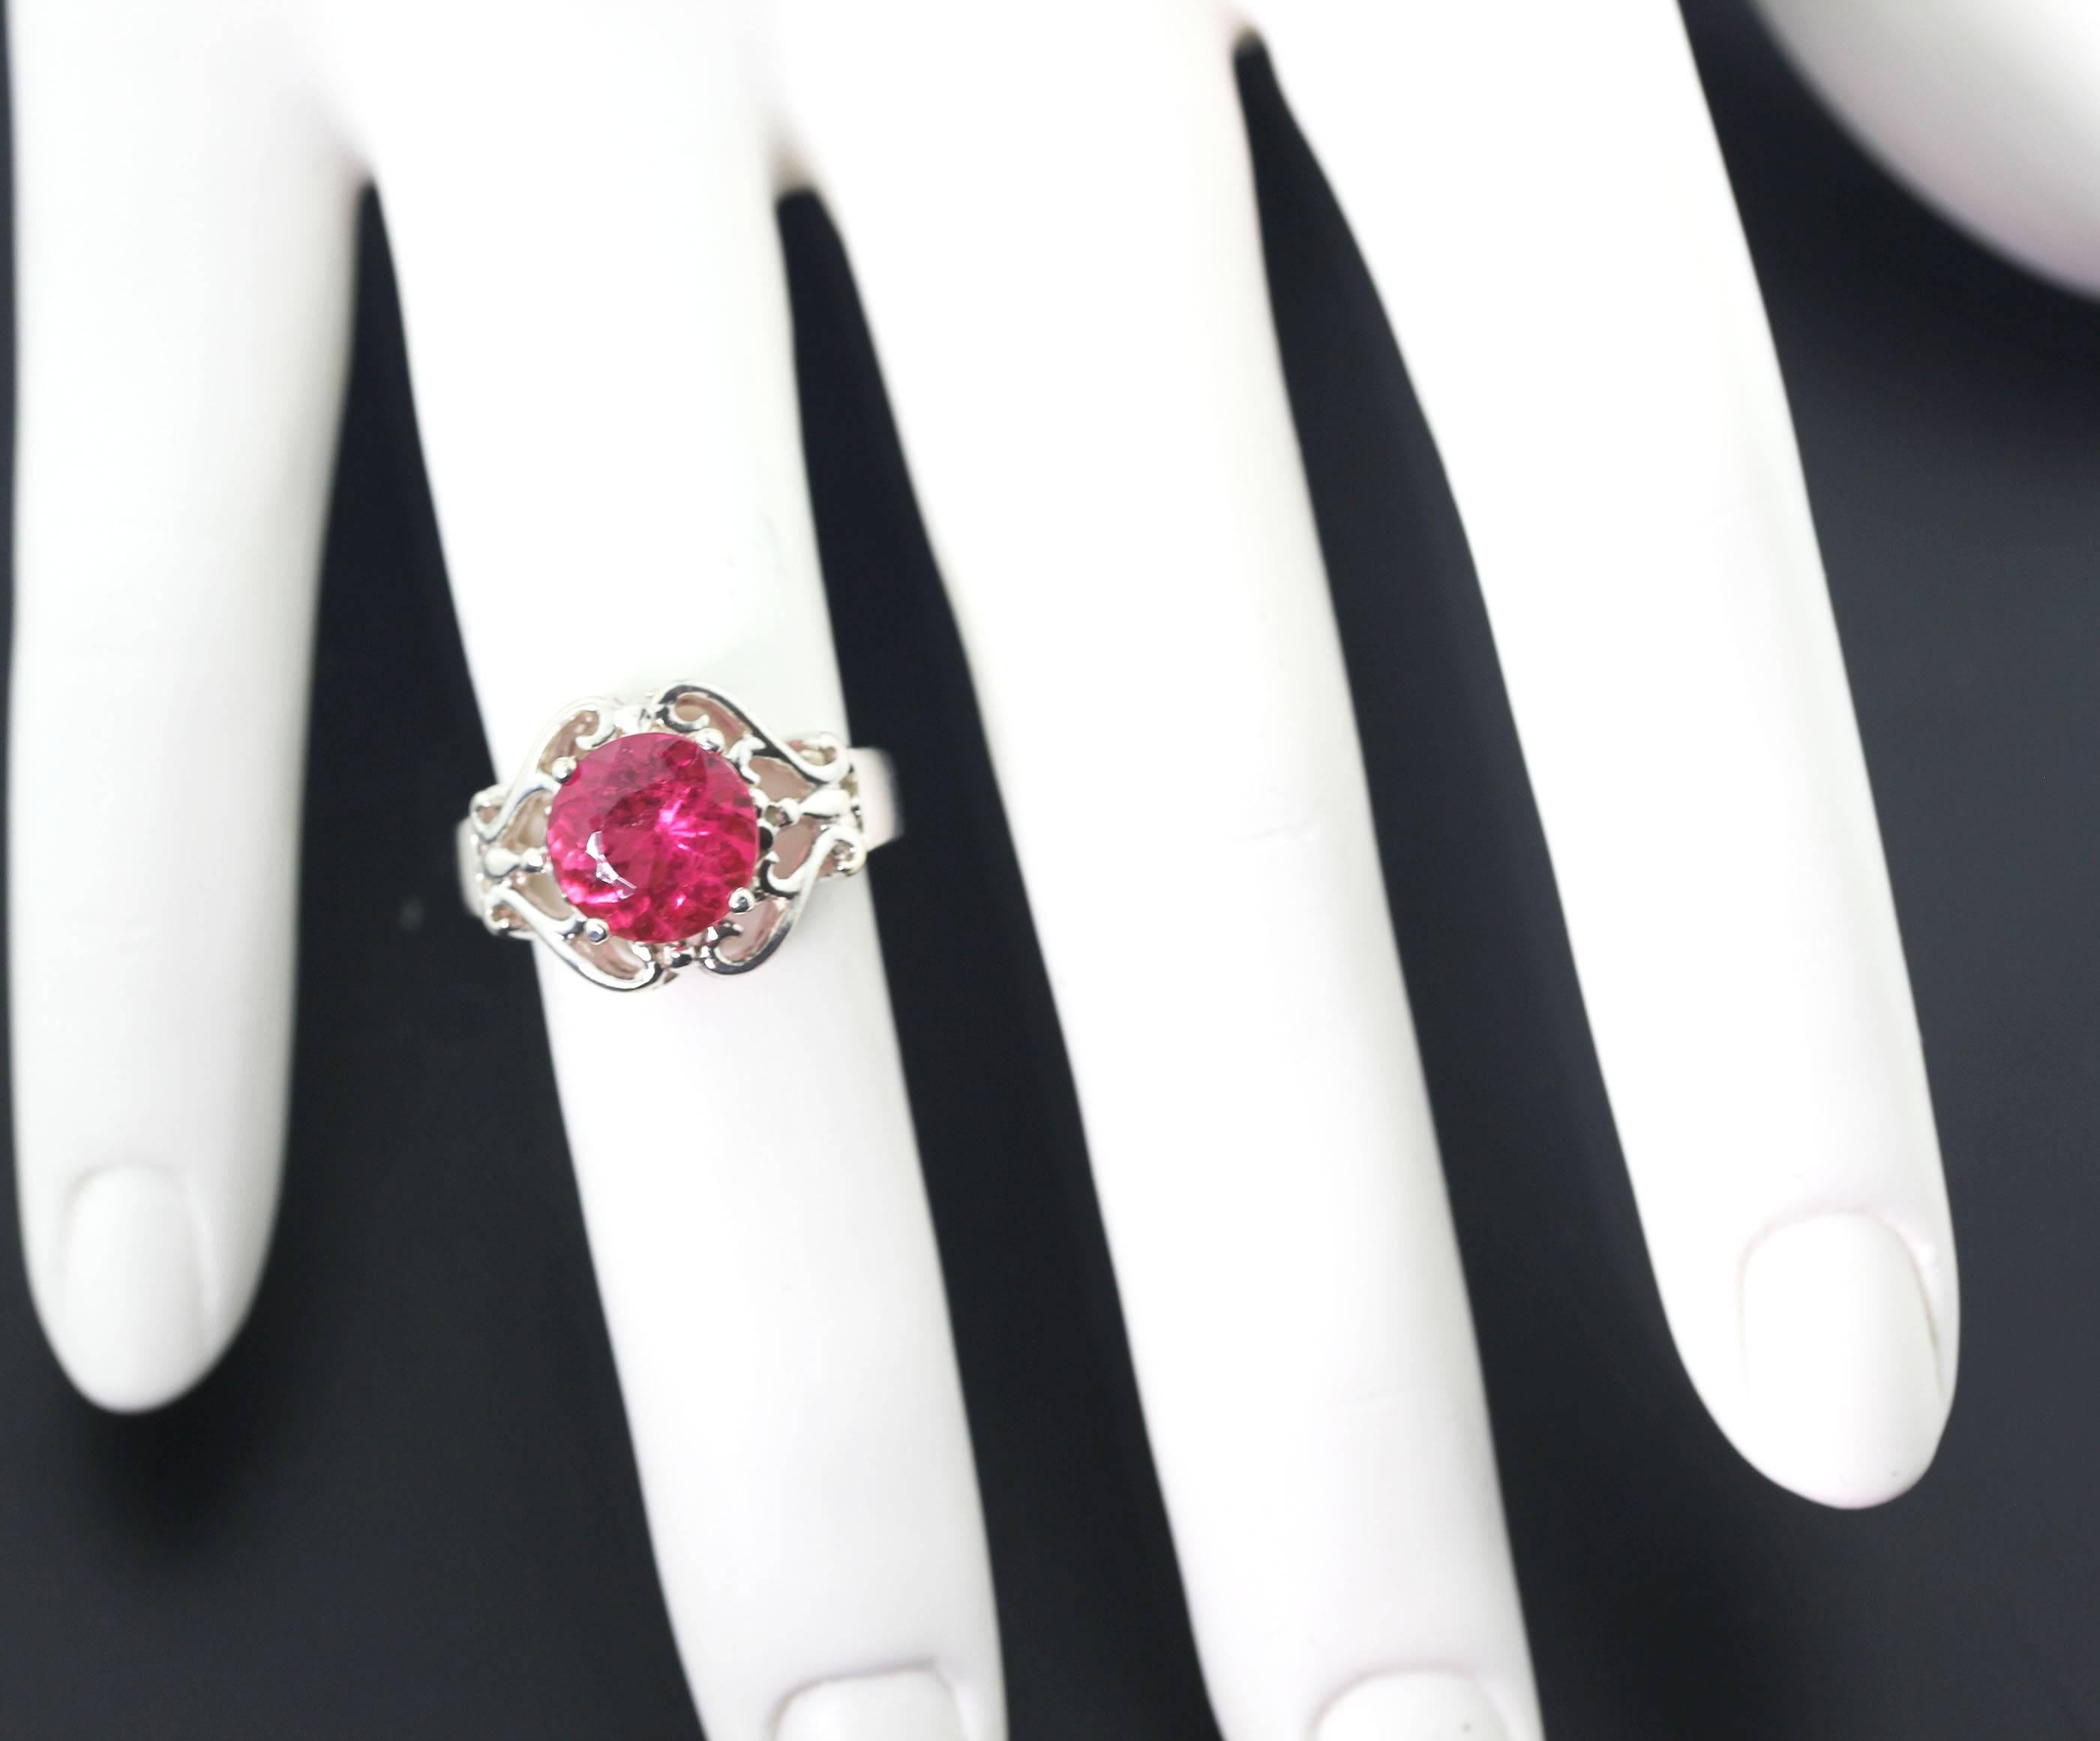 AJD Gorgeously Glittering 2.74 Ct ReddishPink Tourmaline Silver Cocktail Ring 1